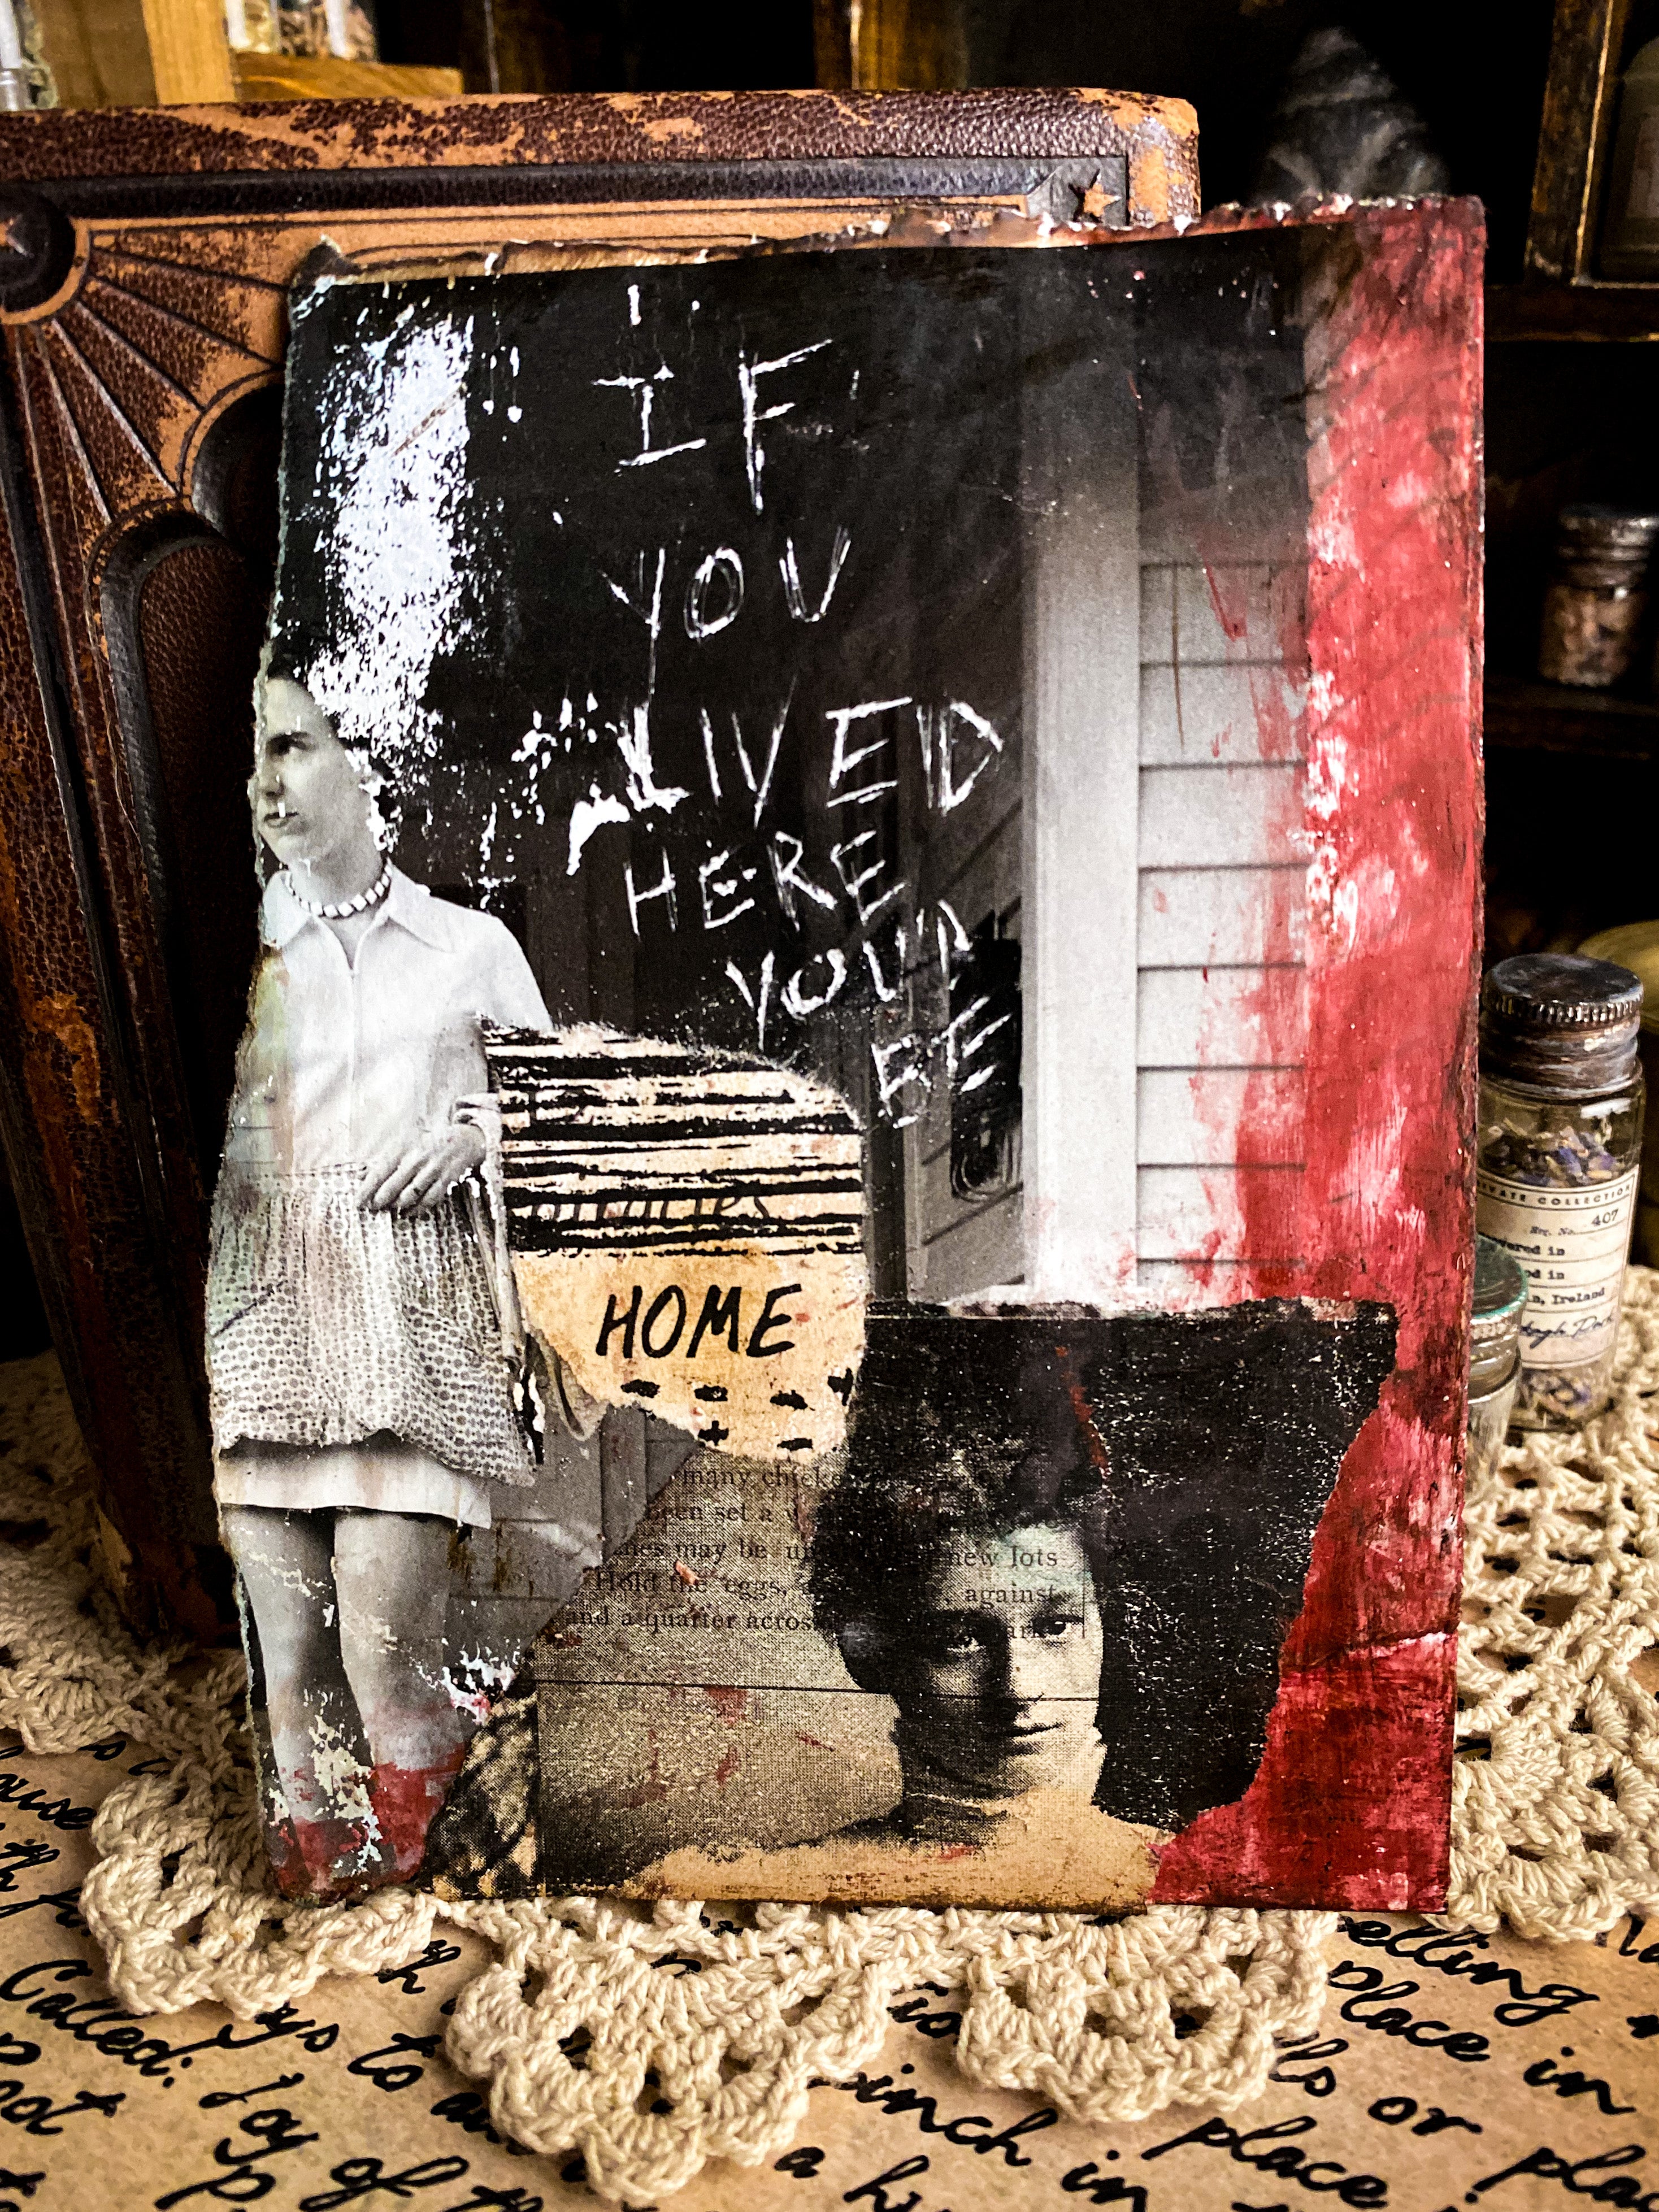 If You Lived Here You’d Be Home - Original Mixed Media Collage